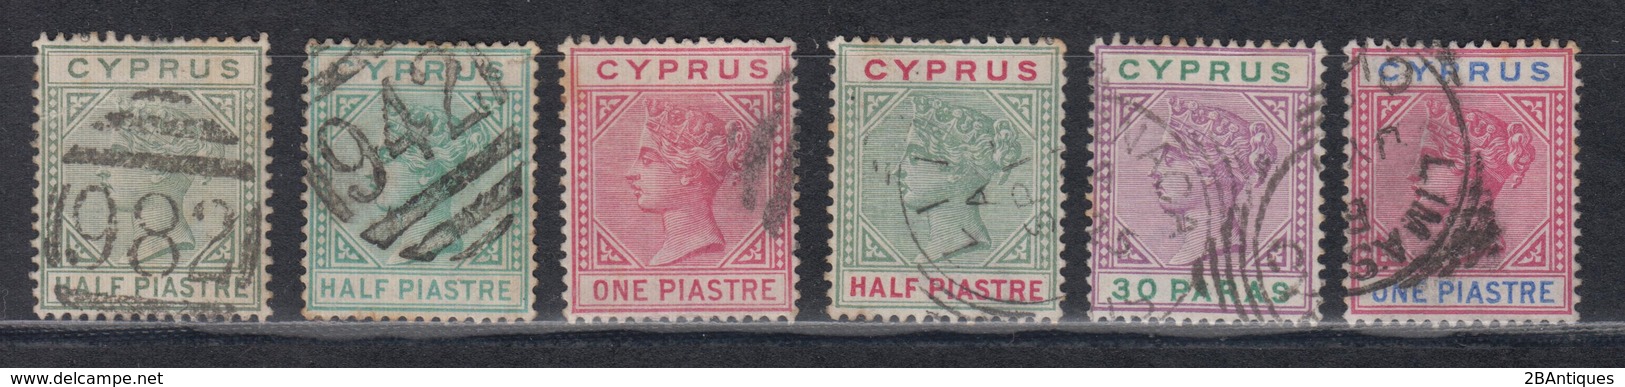 CYPRUS 1882-96 - Queen Victoria Early Stamps - Gebraucht